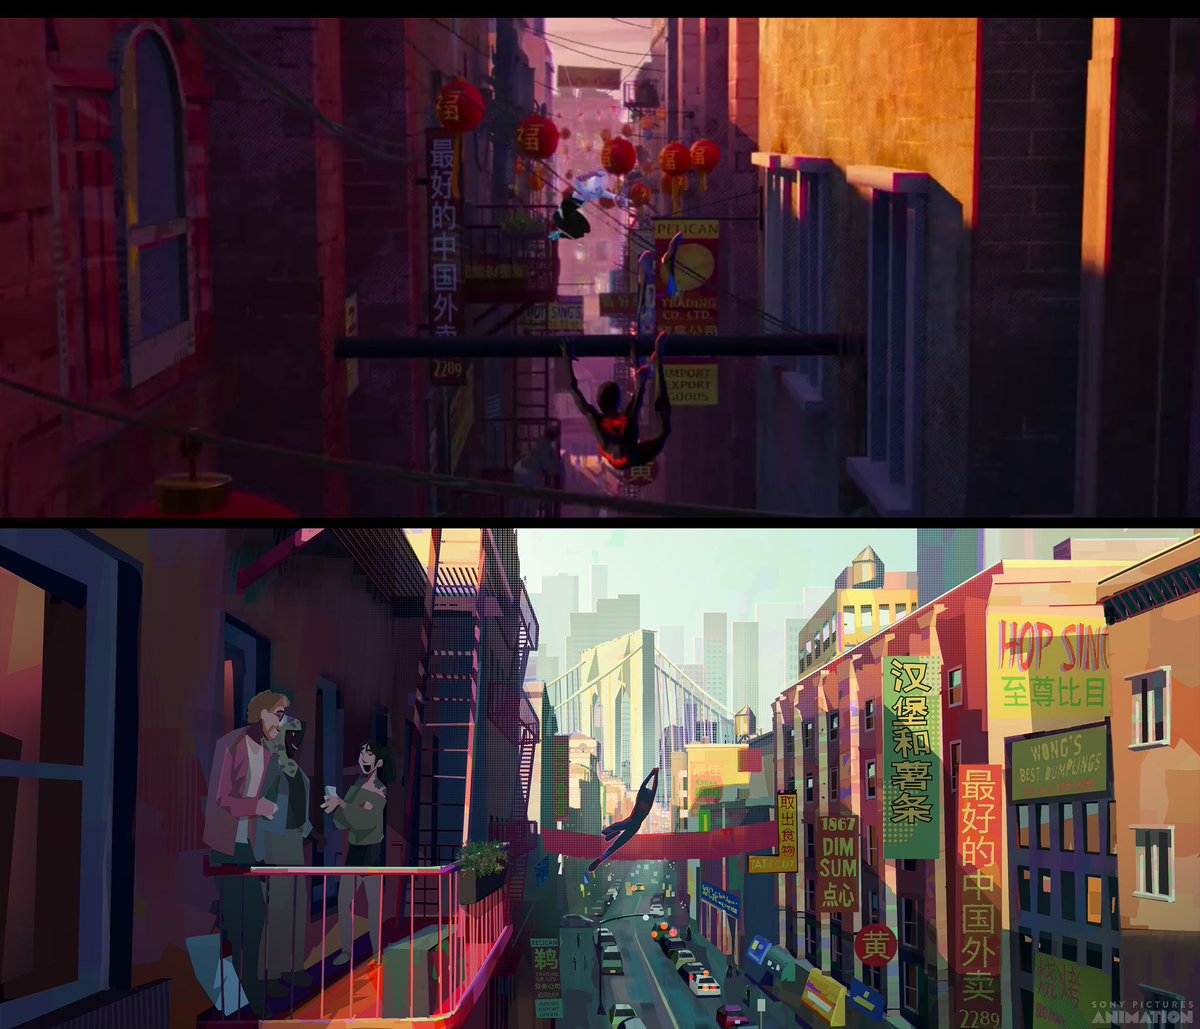 Part 3: With the Chinatown shot it was later cut from the beginning as there was a sequence with miles and Gwen swinging through.  #colorkey #visualdevelopment #colors #spiderman #acrossthespiderverse #sony #sonypicturesanimation #milesmorales #newyork #art #animationart #marvel